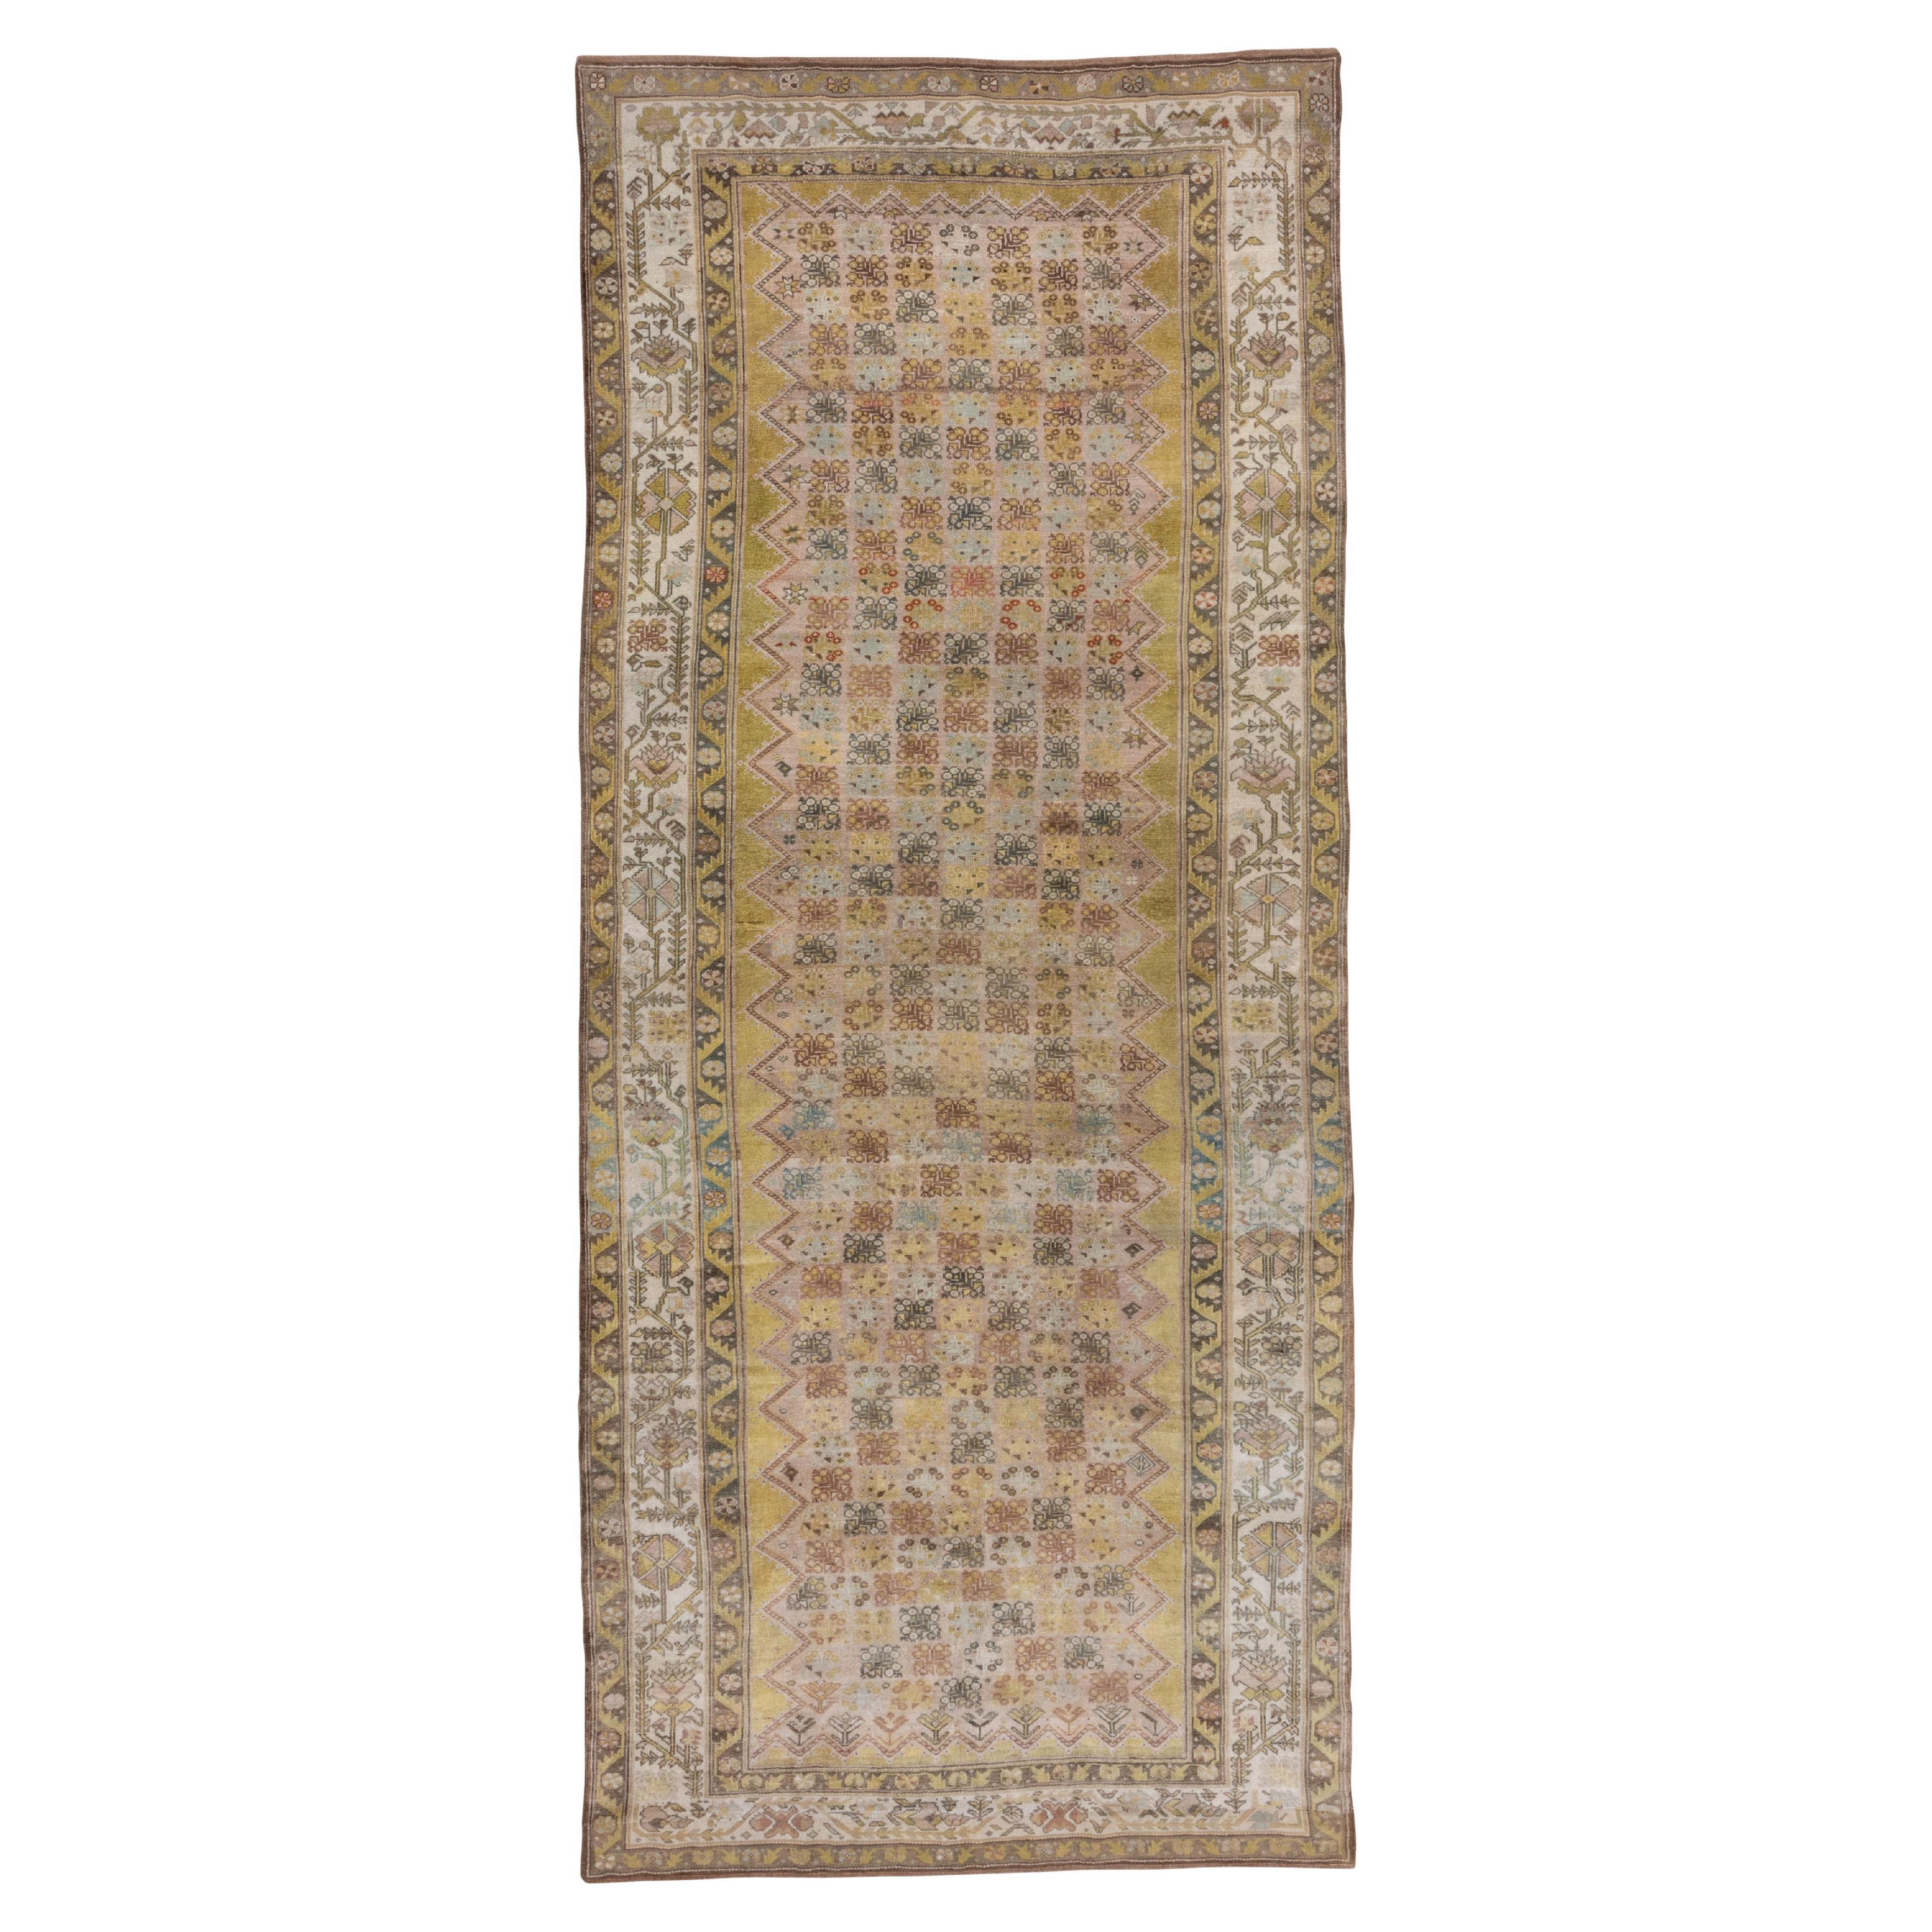 Unique Antique Northwest Persian Gallery Rug, Lime Green Boxed Floral Field For Sale